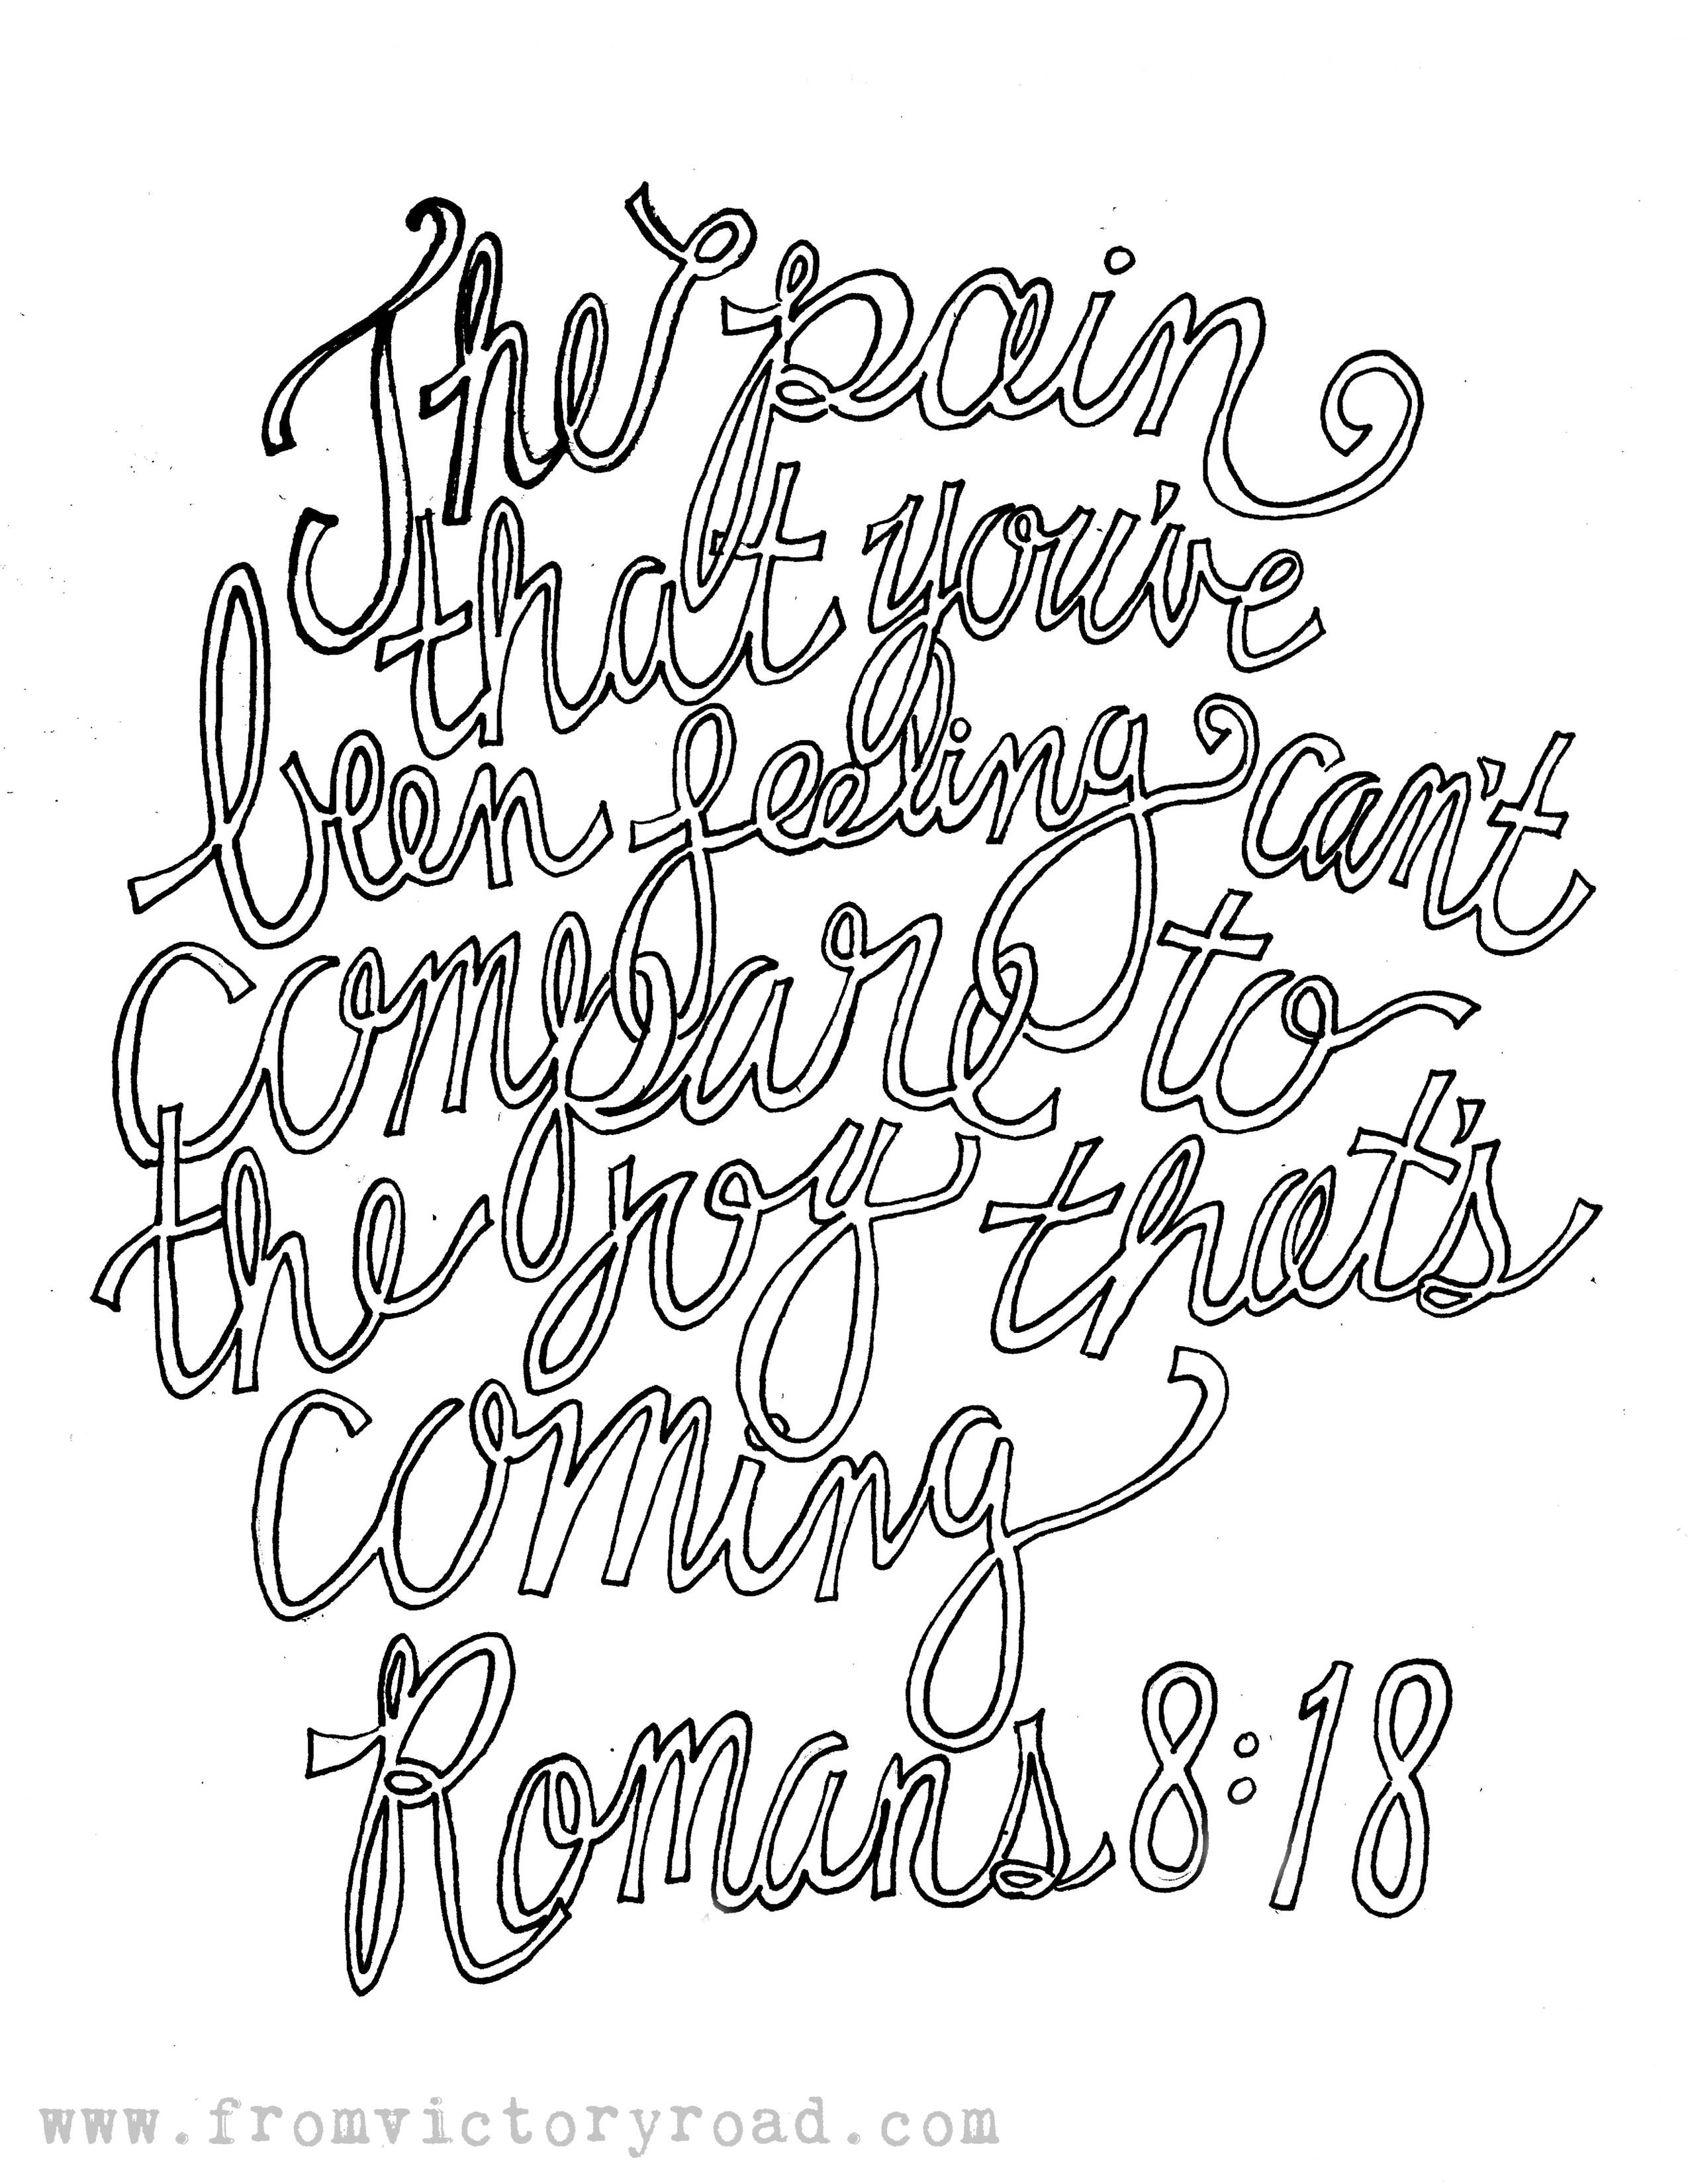 Romans 8:18 Coloring Page – From Victory Road